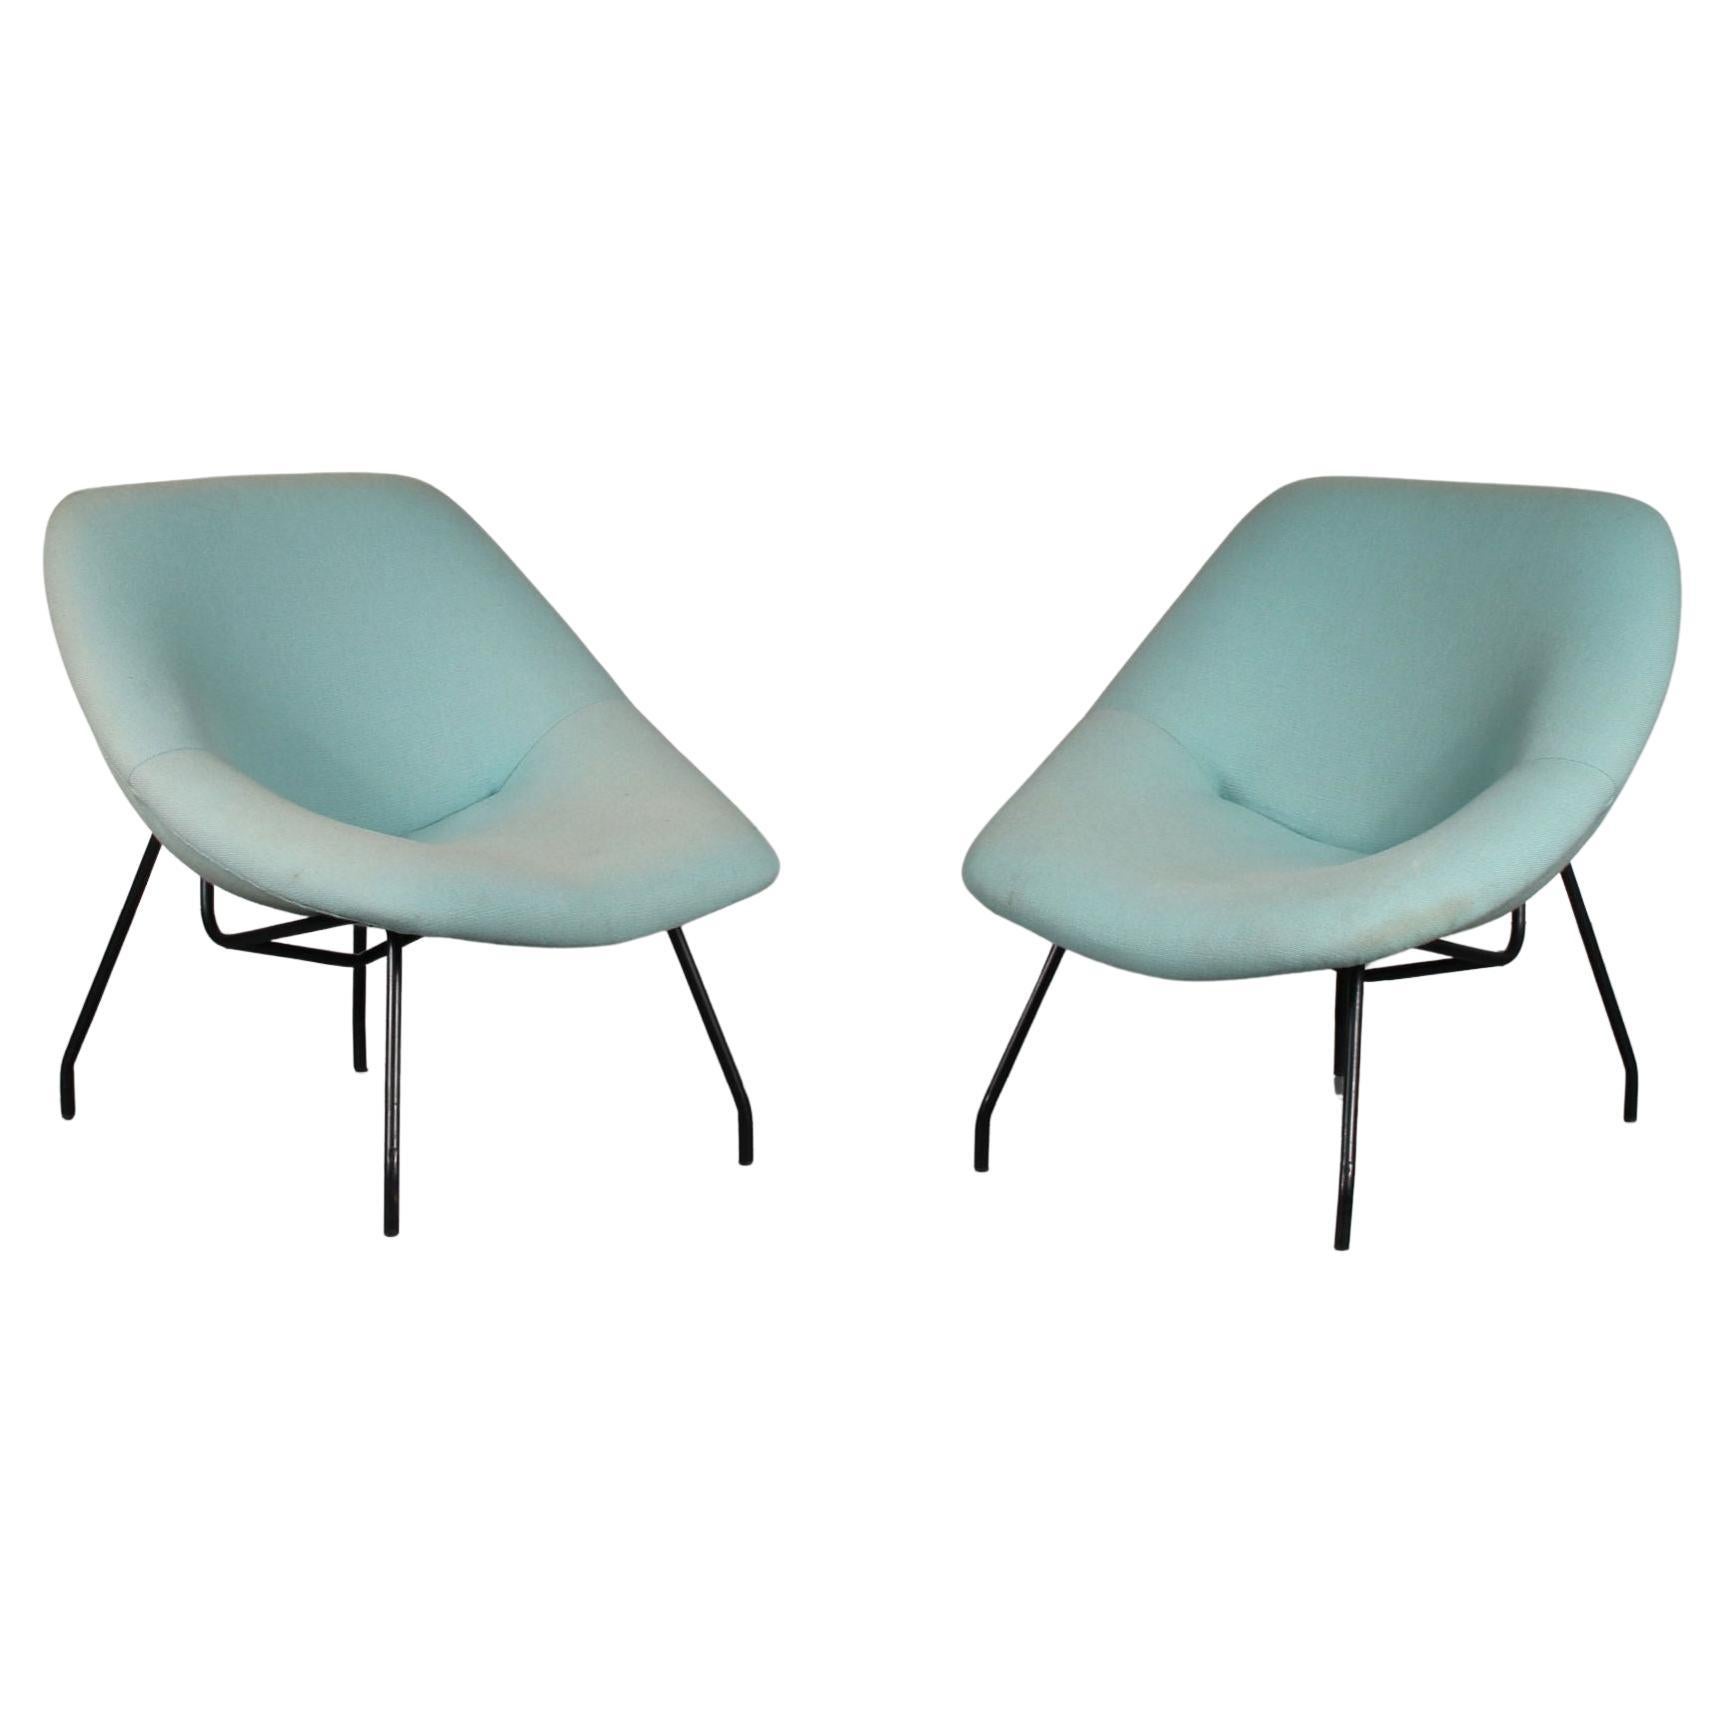 Rare Pair of Lounge Chairs by GAR, France, 1950